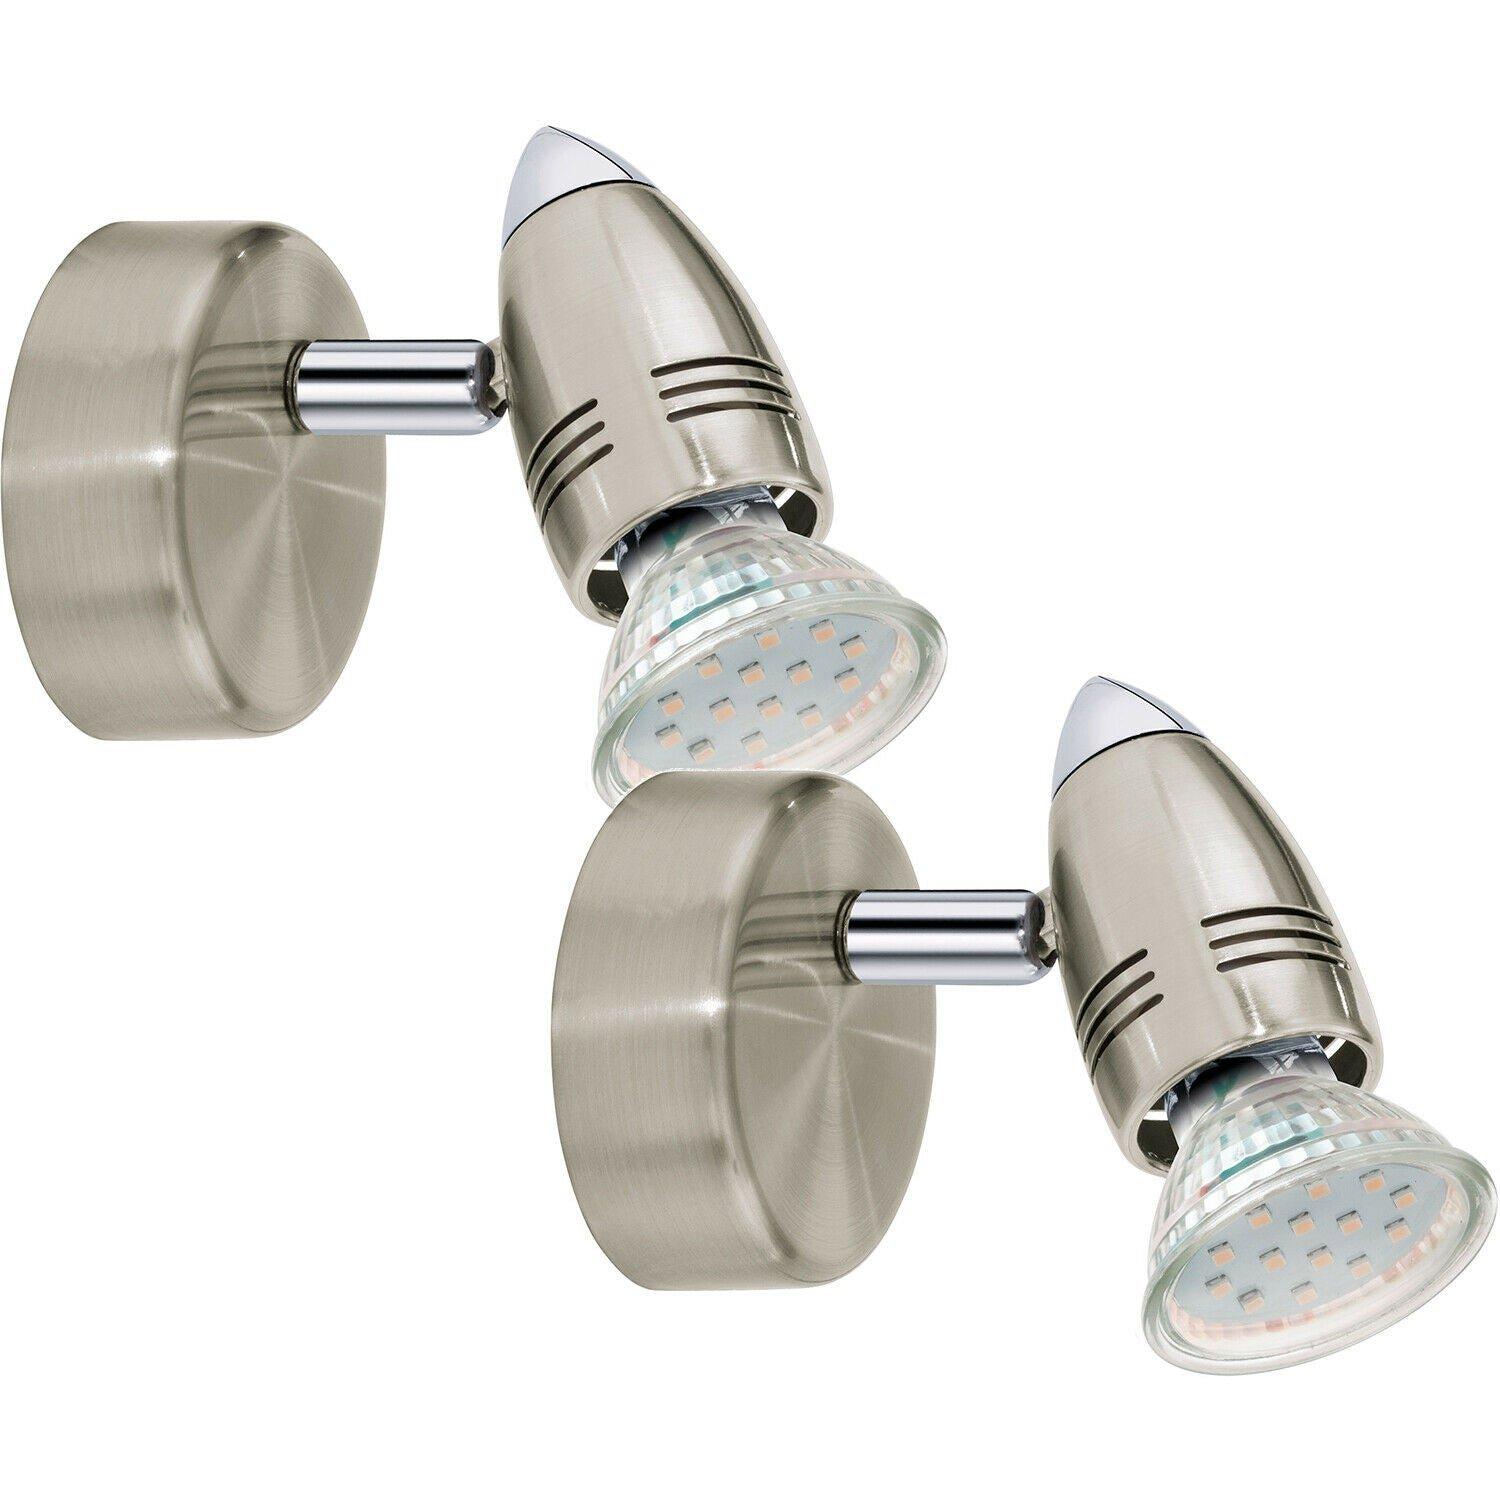 2 PACK Wall 1 Spot Light Colour Satin Nickel Chrome Plated GU10 1x3W Included